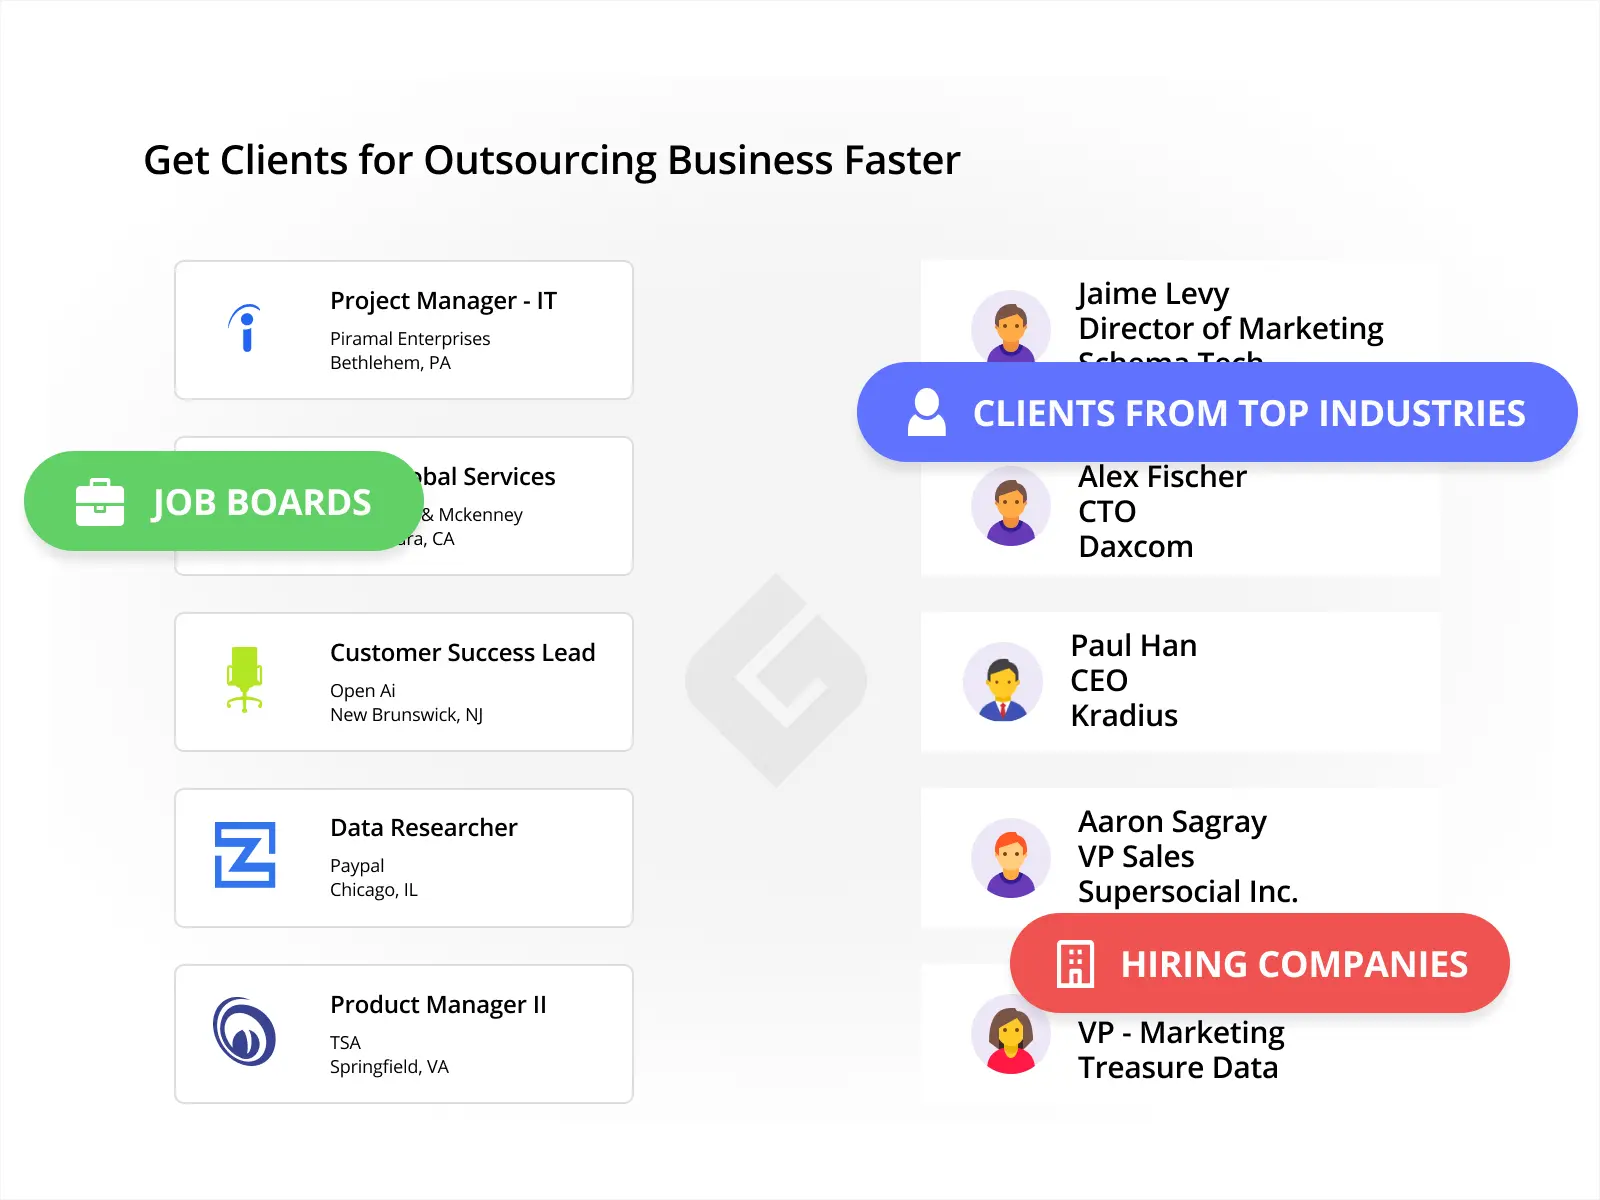 Get Clients for Outsourcing Business 10x Faster